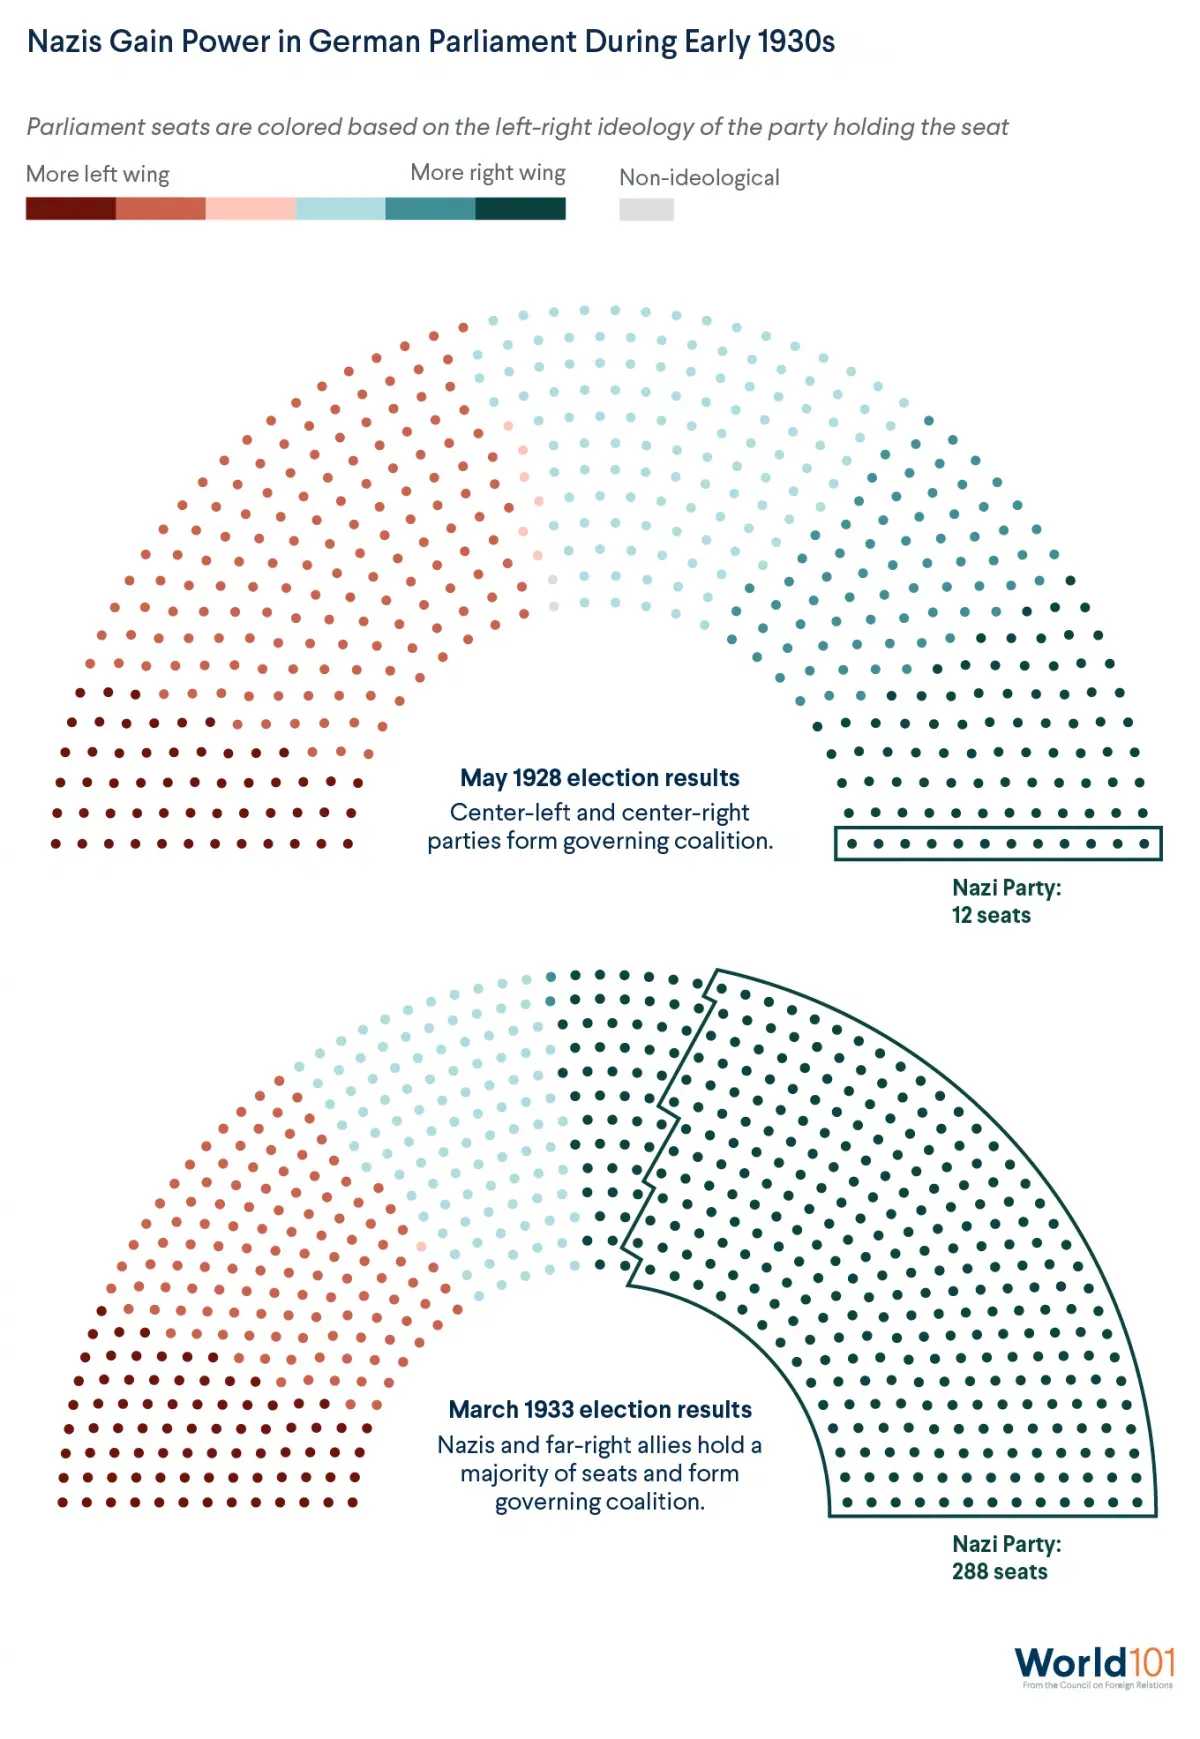 Graphic showing how Nazis gained power in the German Parliament through elections in the early 1930s. For more info contact us at world101@cfr.org.